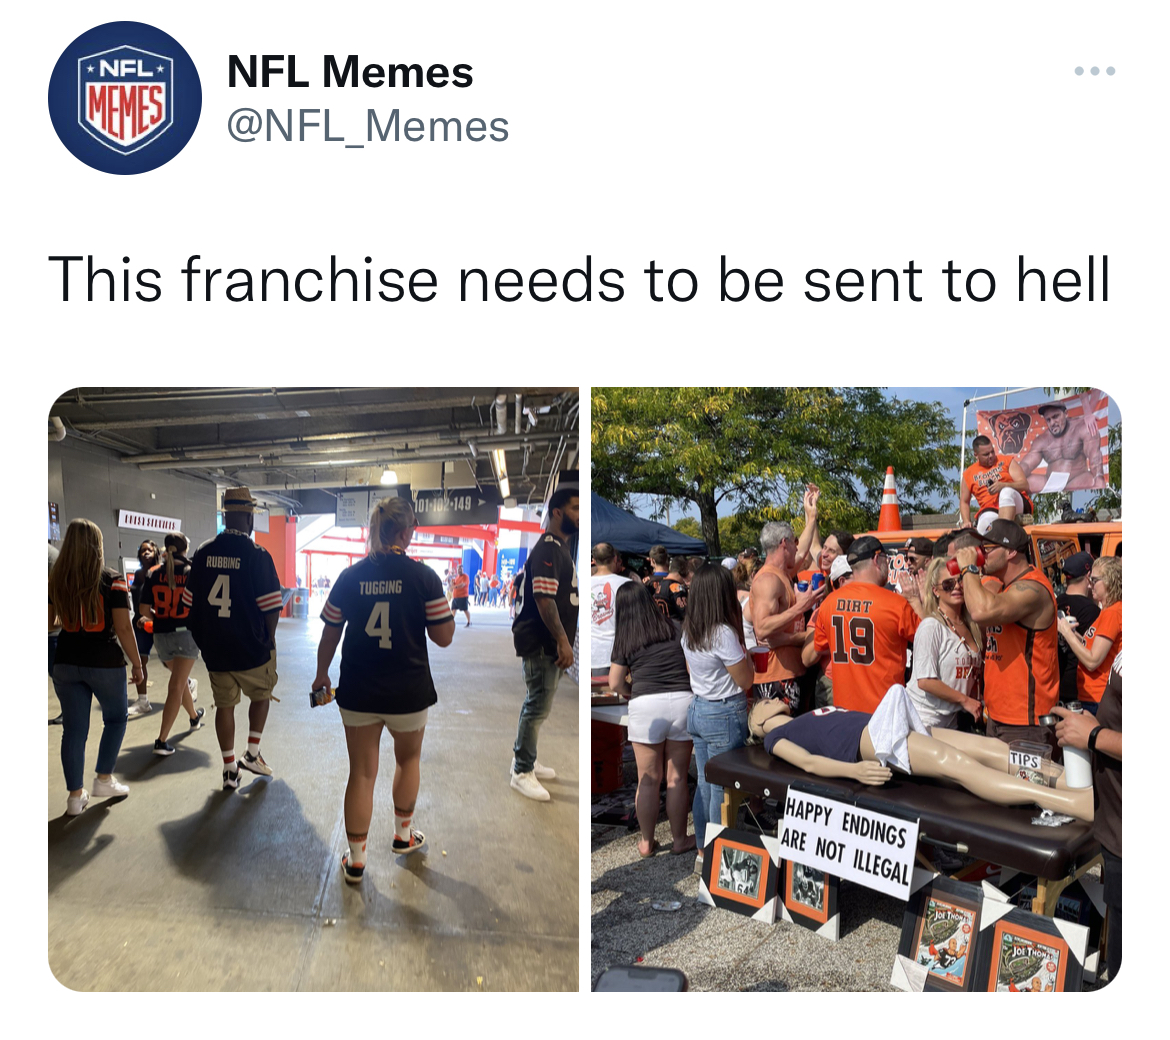 salty and savage nfl memes - community - Nfl Nfl Memes Memes This franchise needs to be sent to hell Thing 4 Den? 19 Happy Endings Are Not Illegal